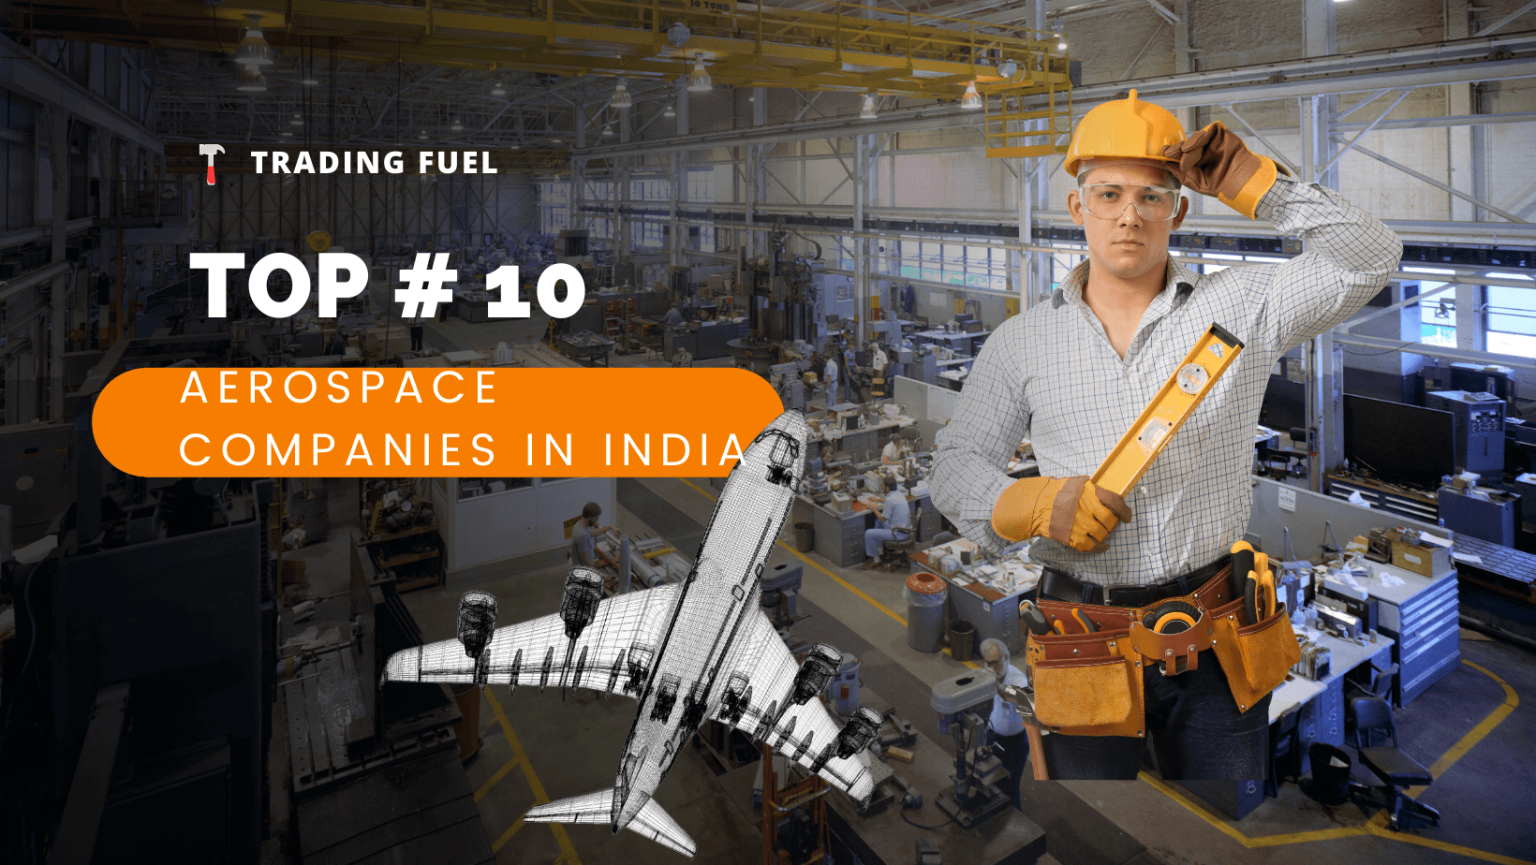 Top 10 Aerospace Companies in India Trading Fuel